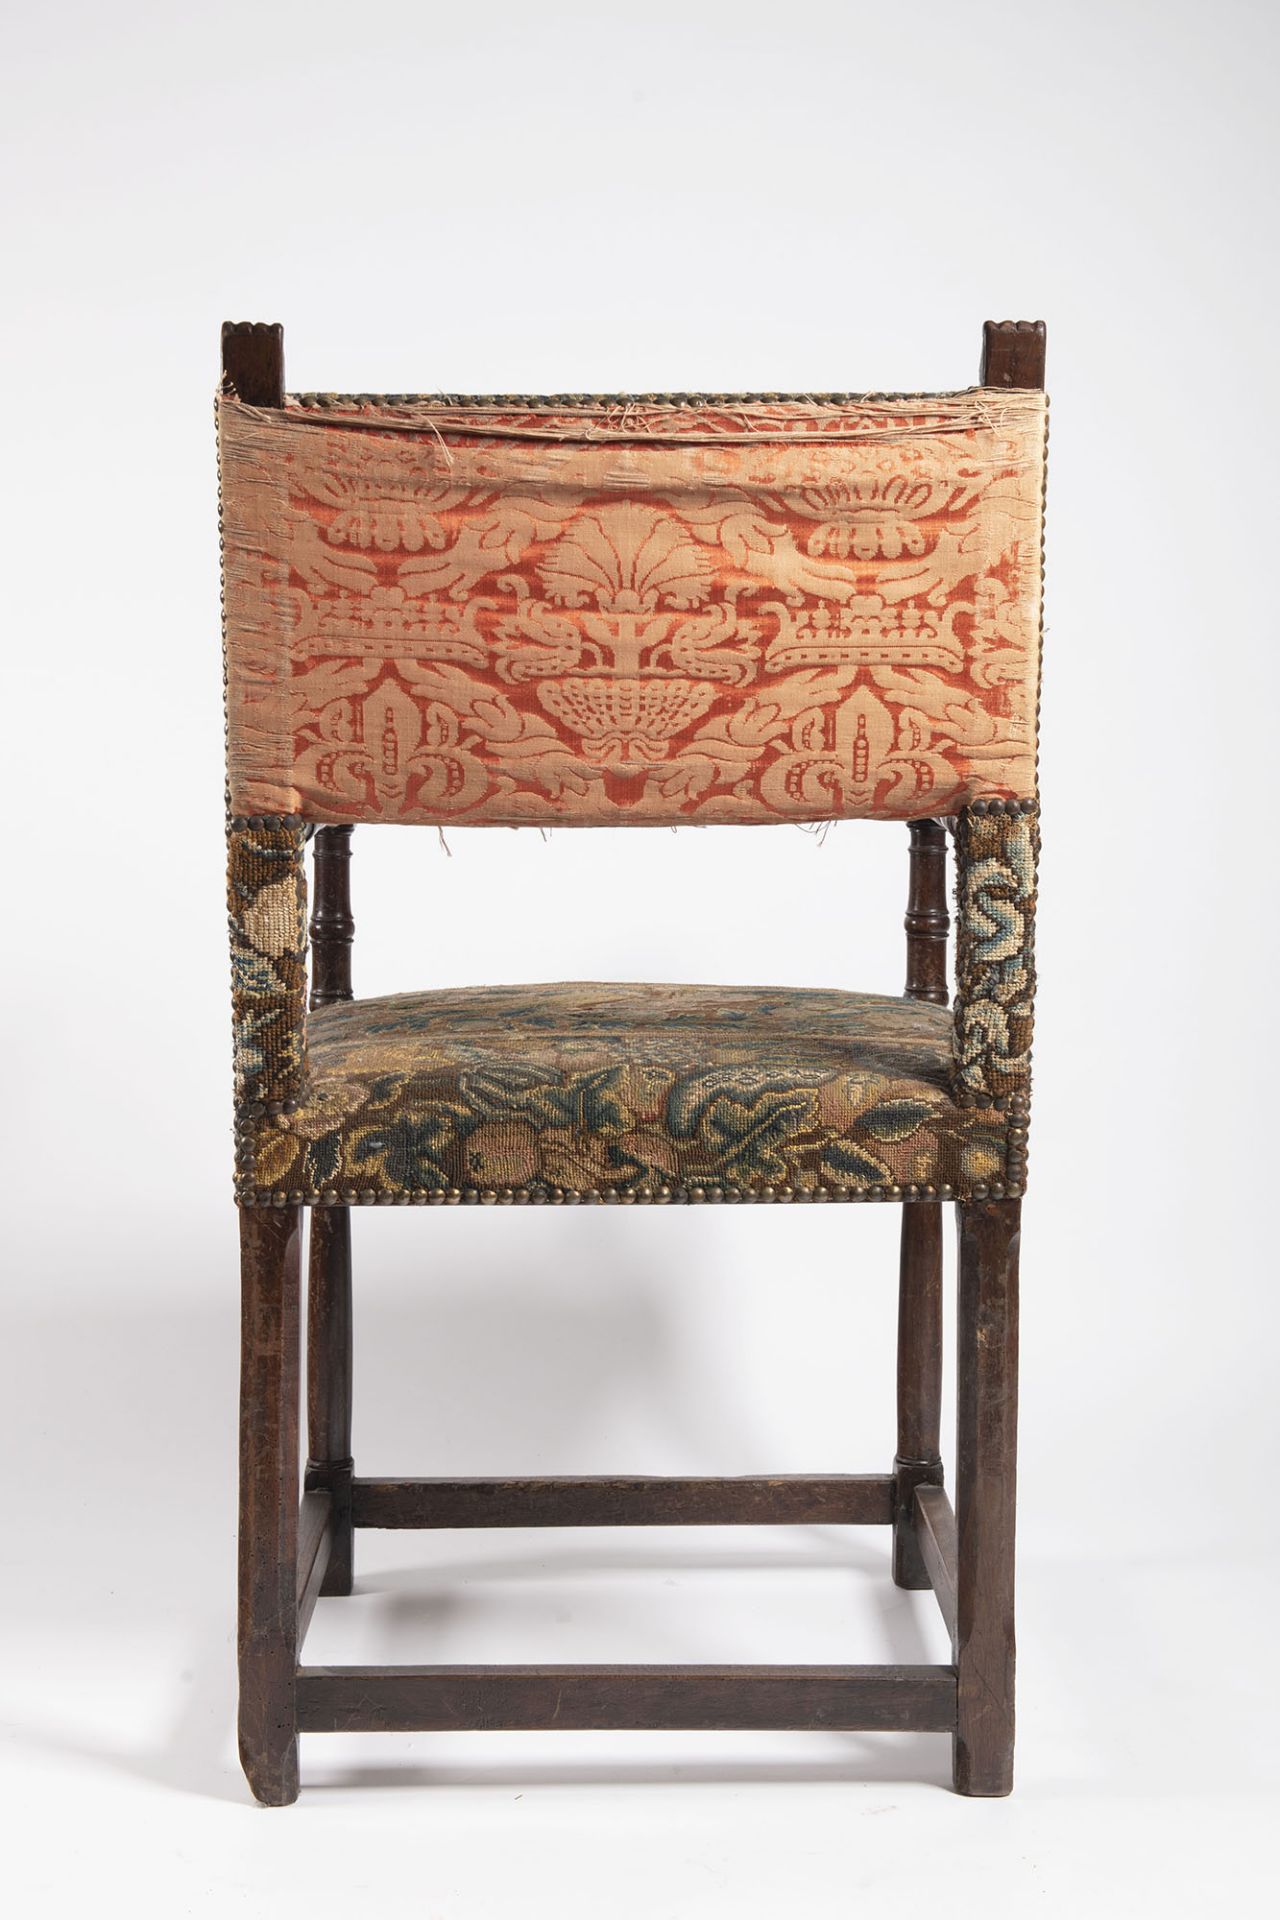 Chair with Arms in Walnut, 17th century - Image 3 of 3